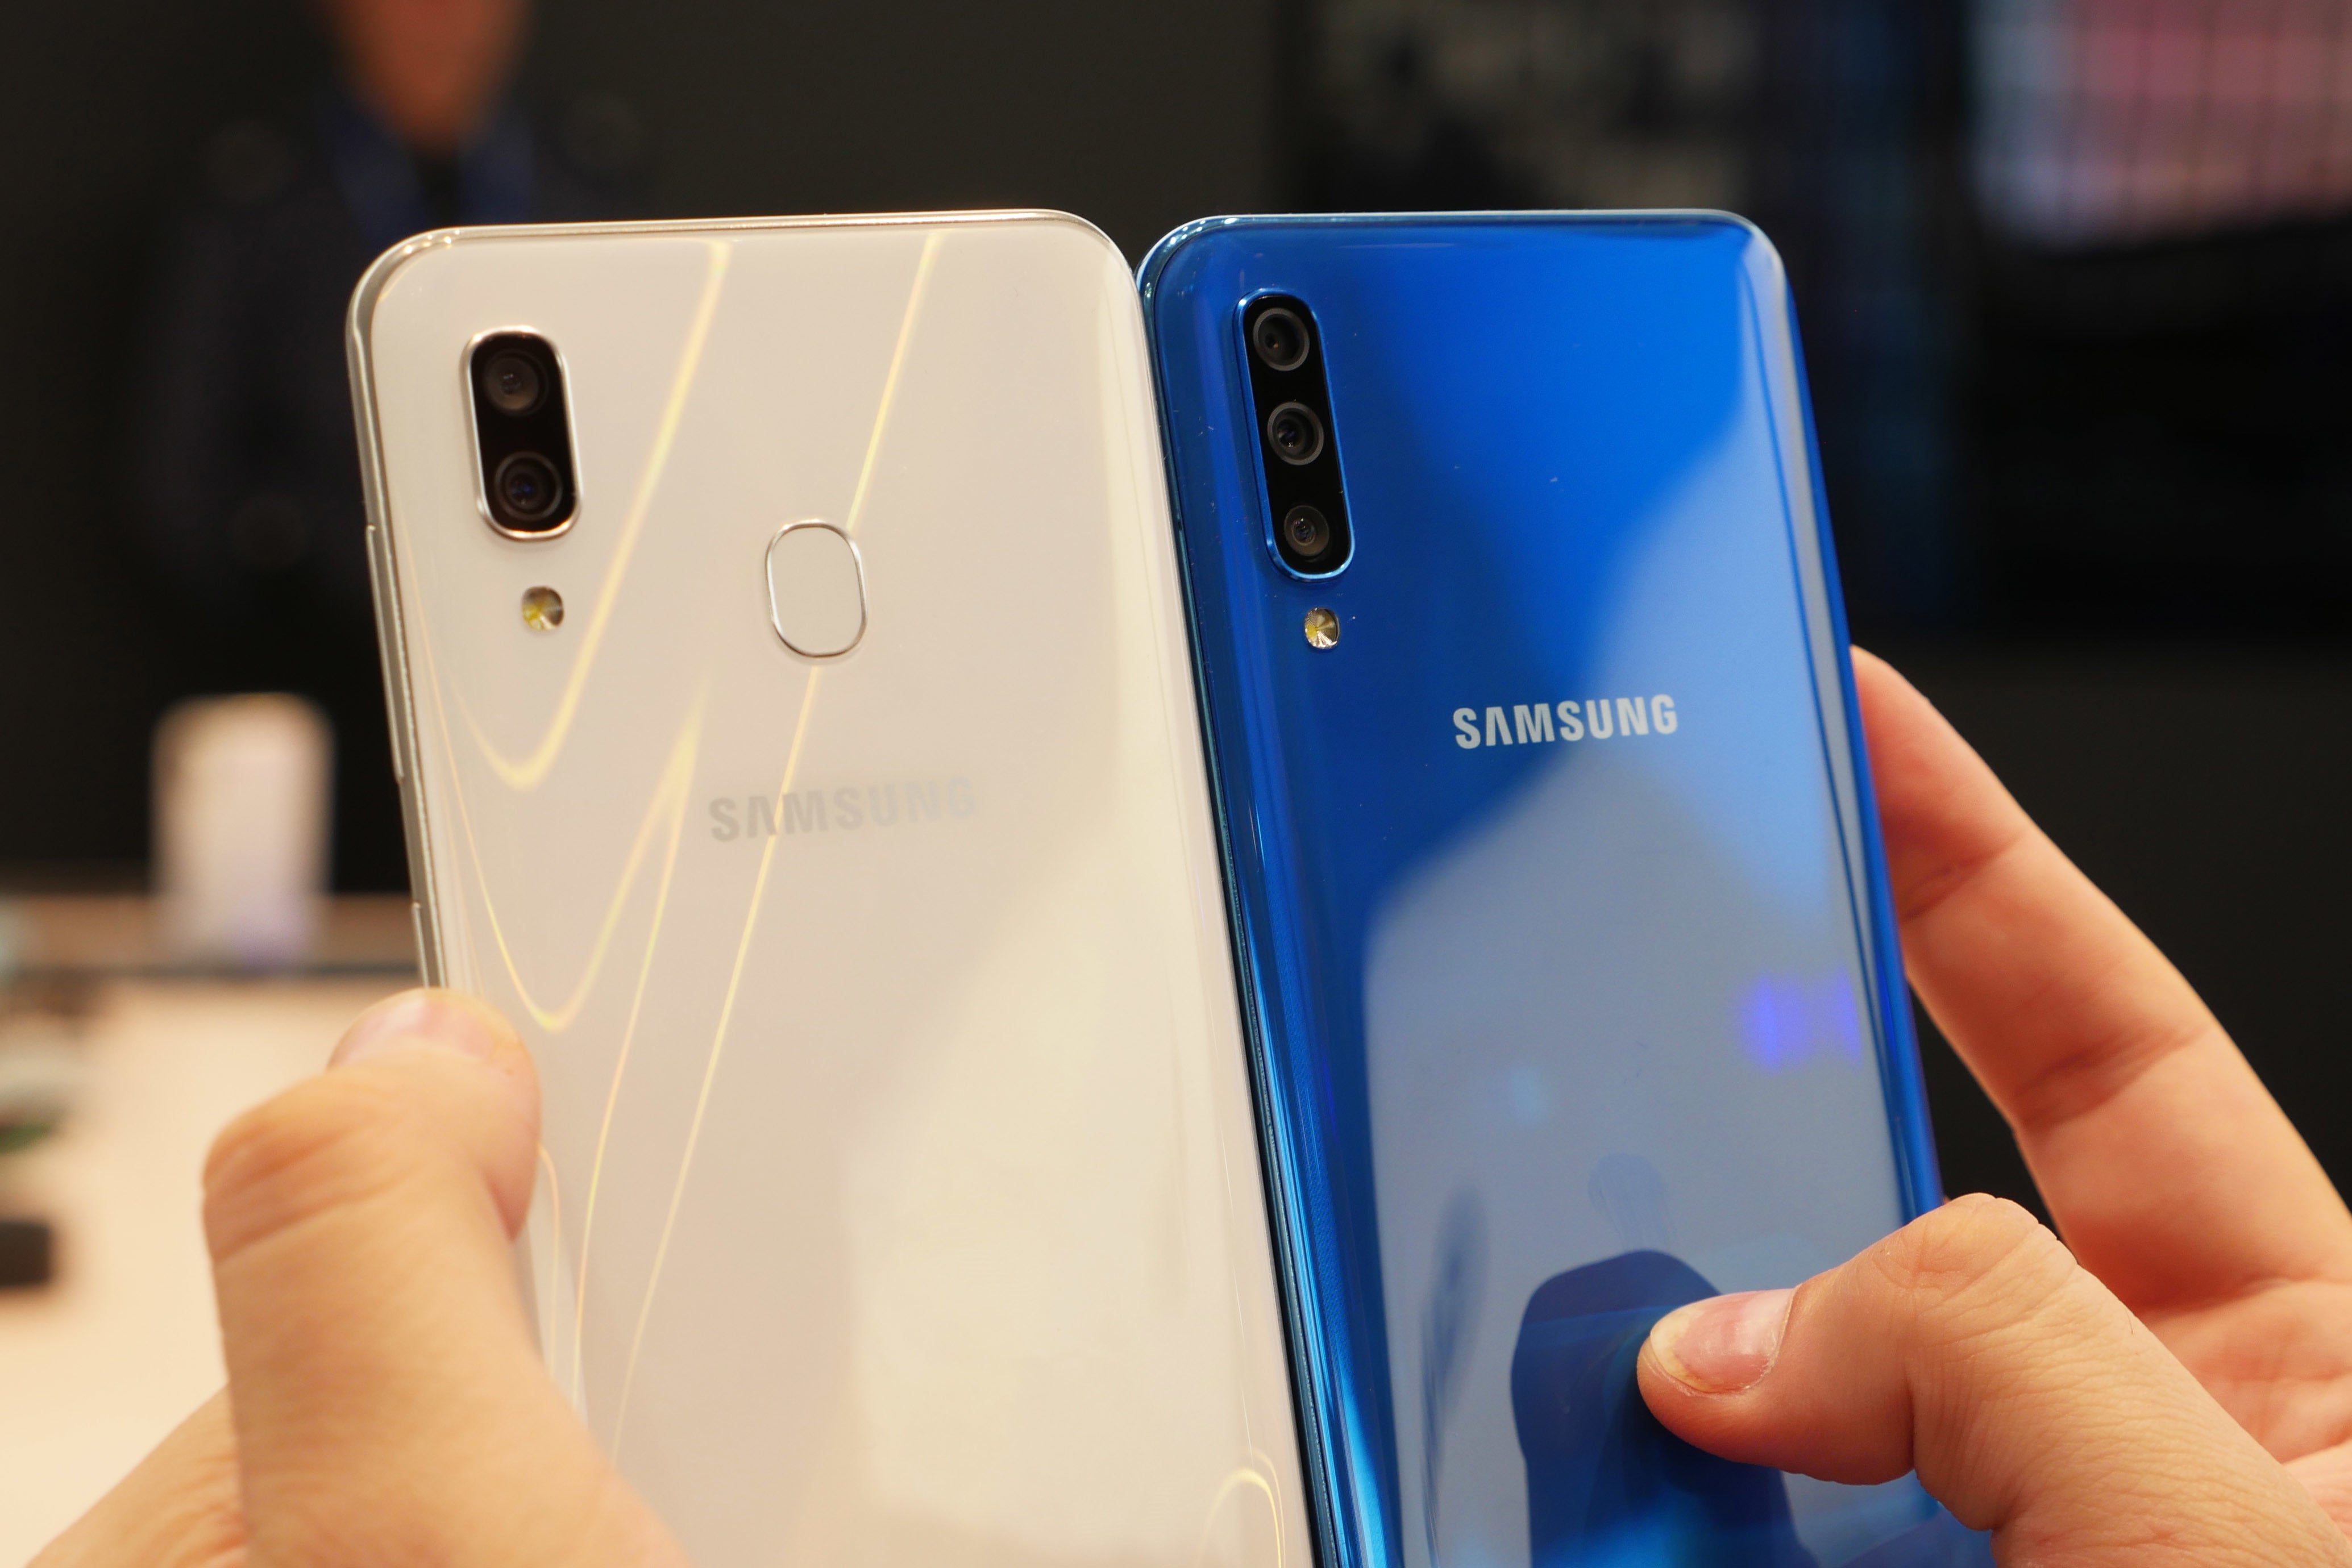 The Samsung Galaxy A30 &amp; A50 - Samsung's latest Galaxy A smartphones are selling incredibly well